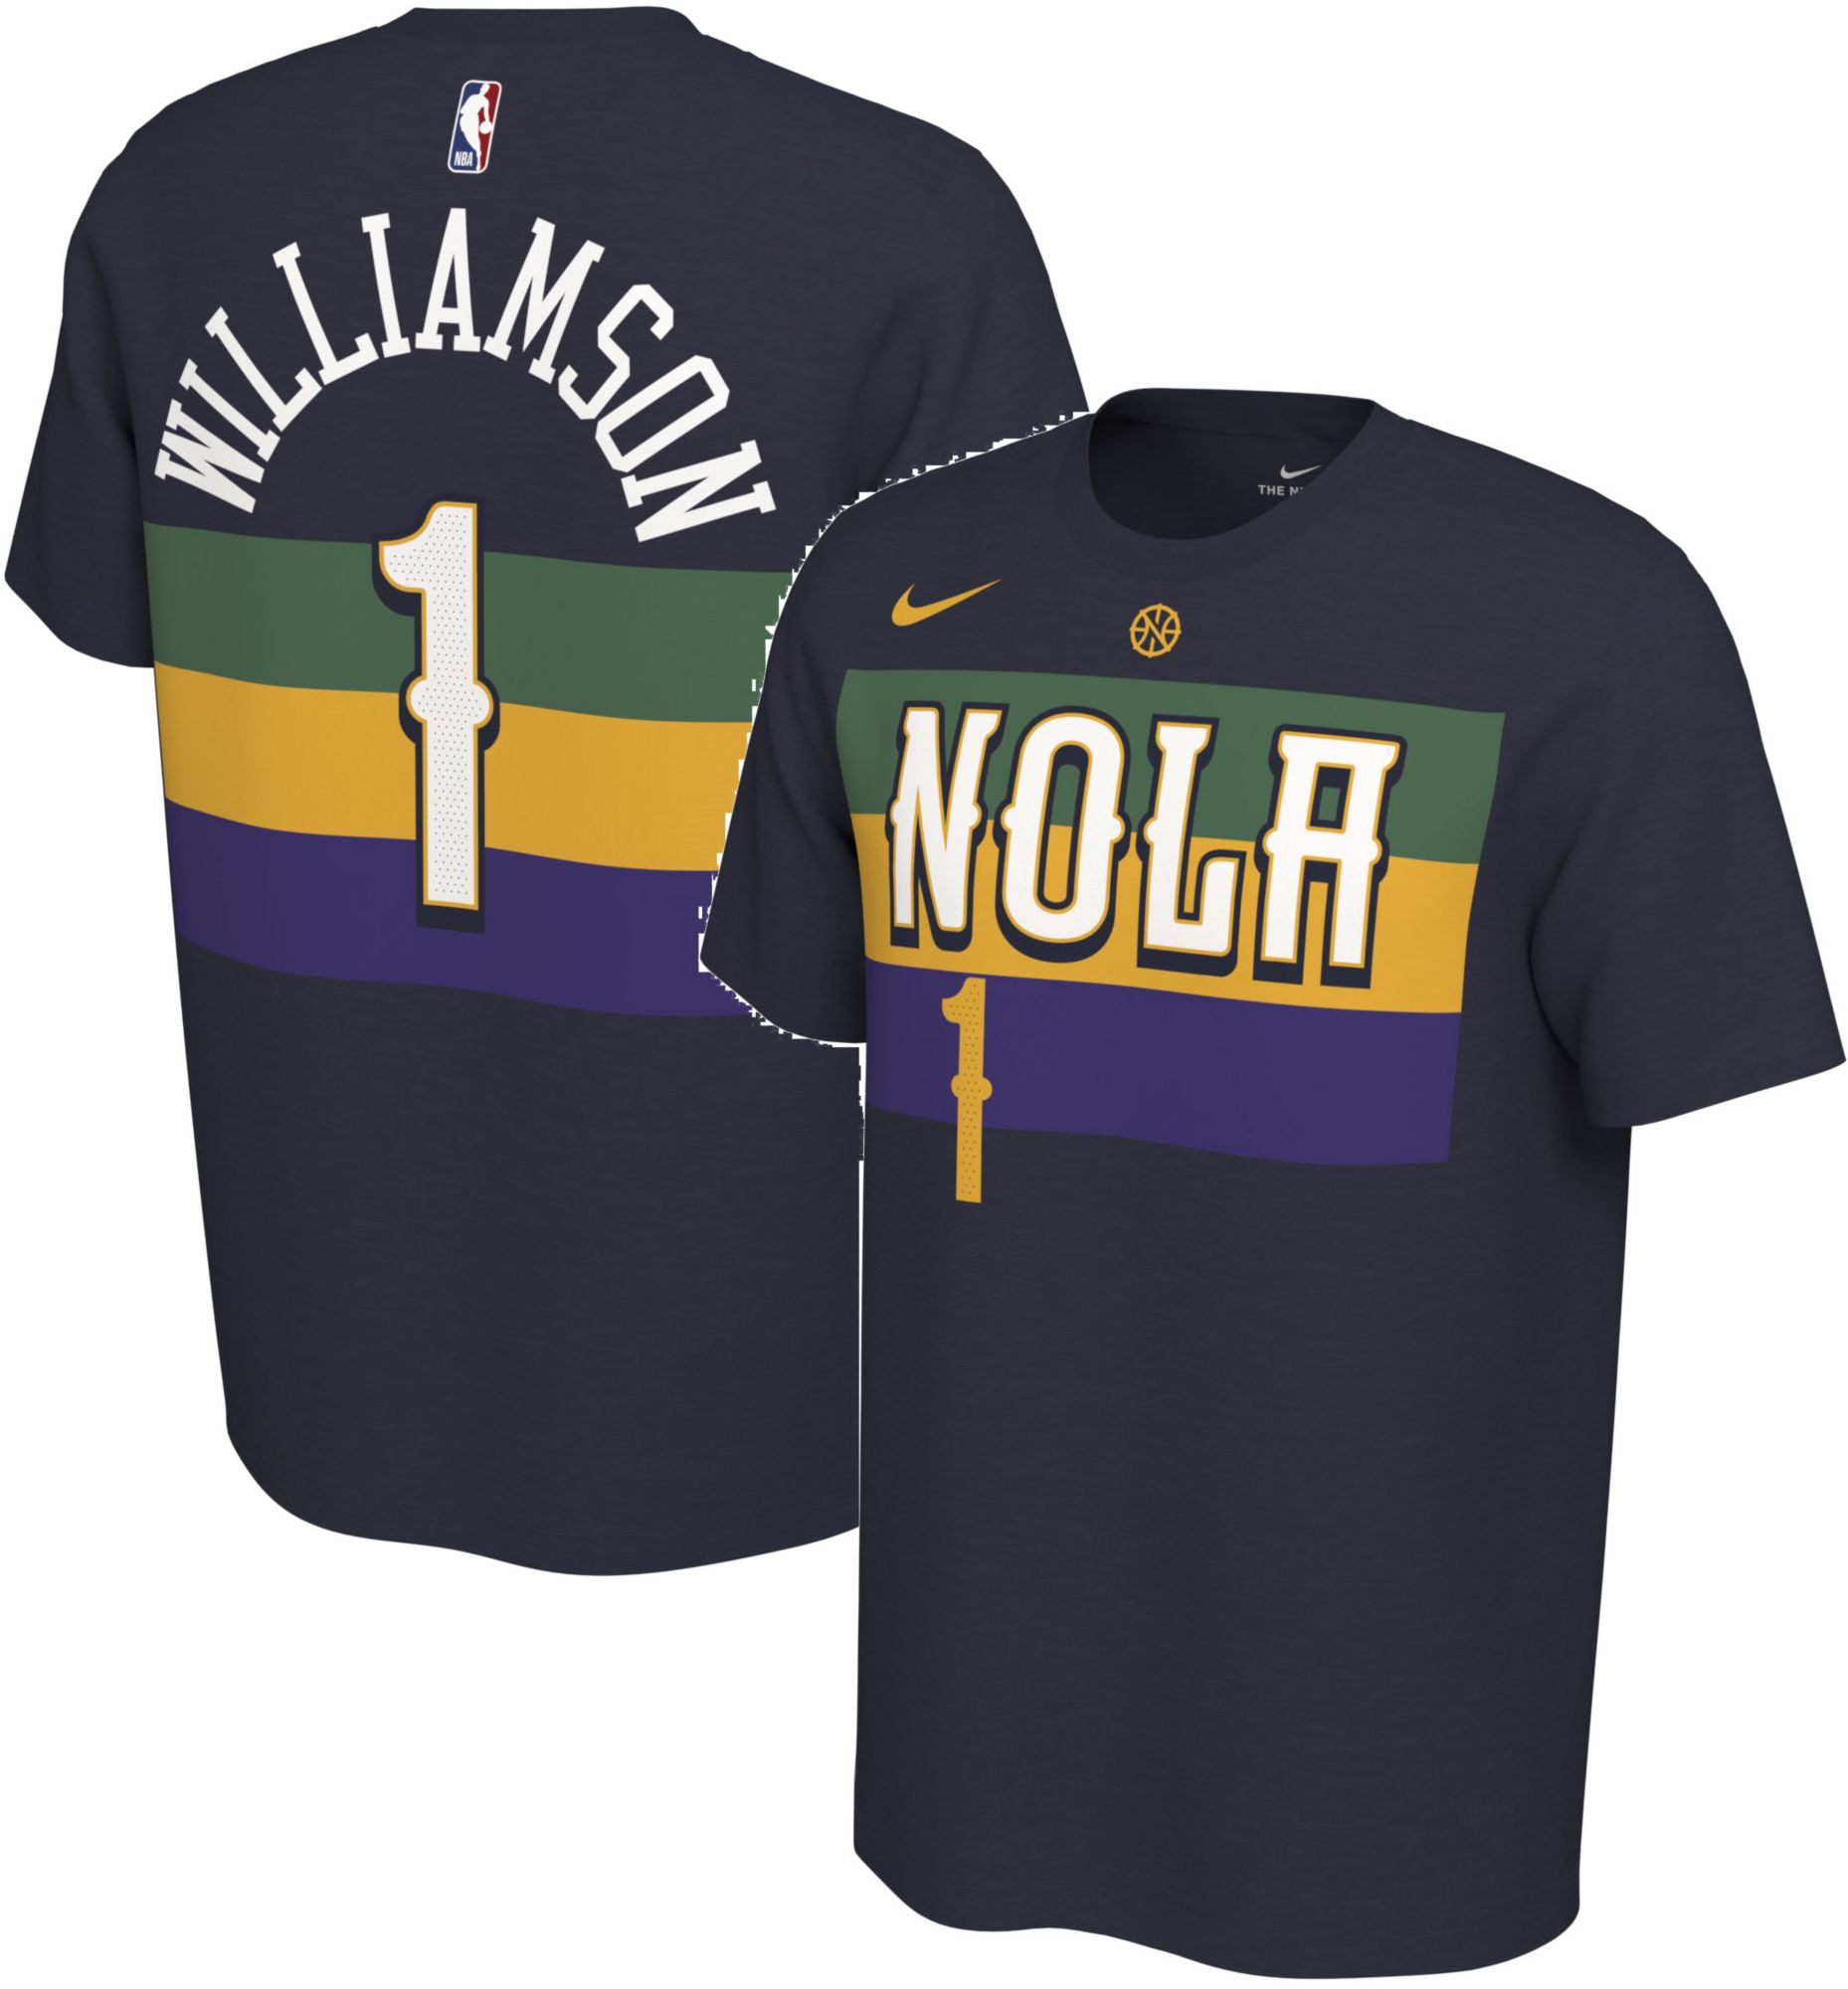 new orleans pelicans nike jersey